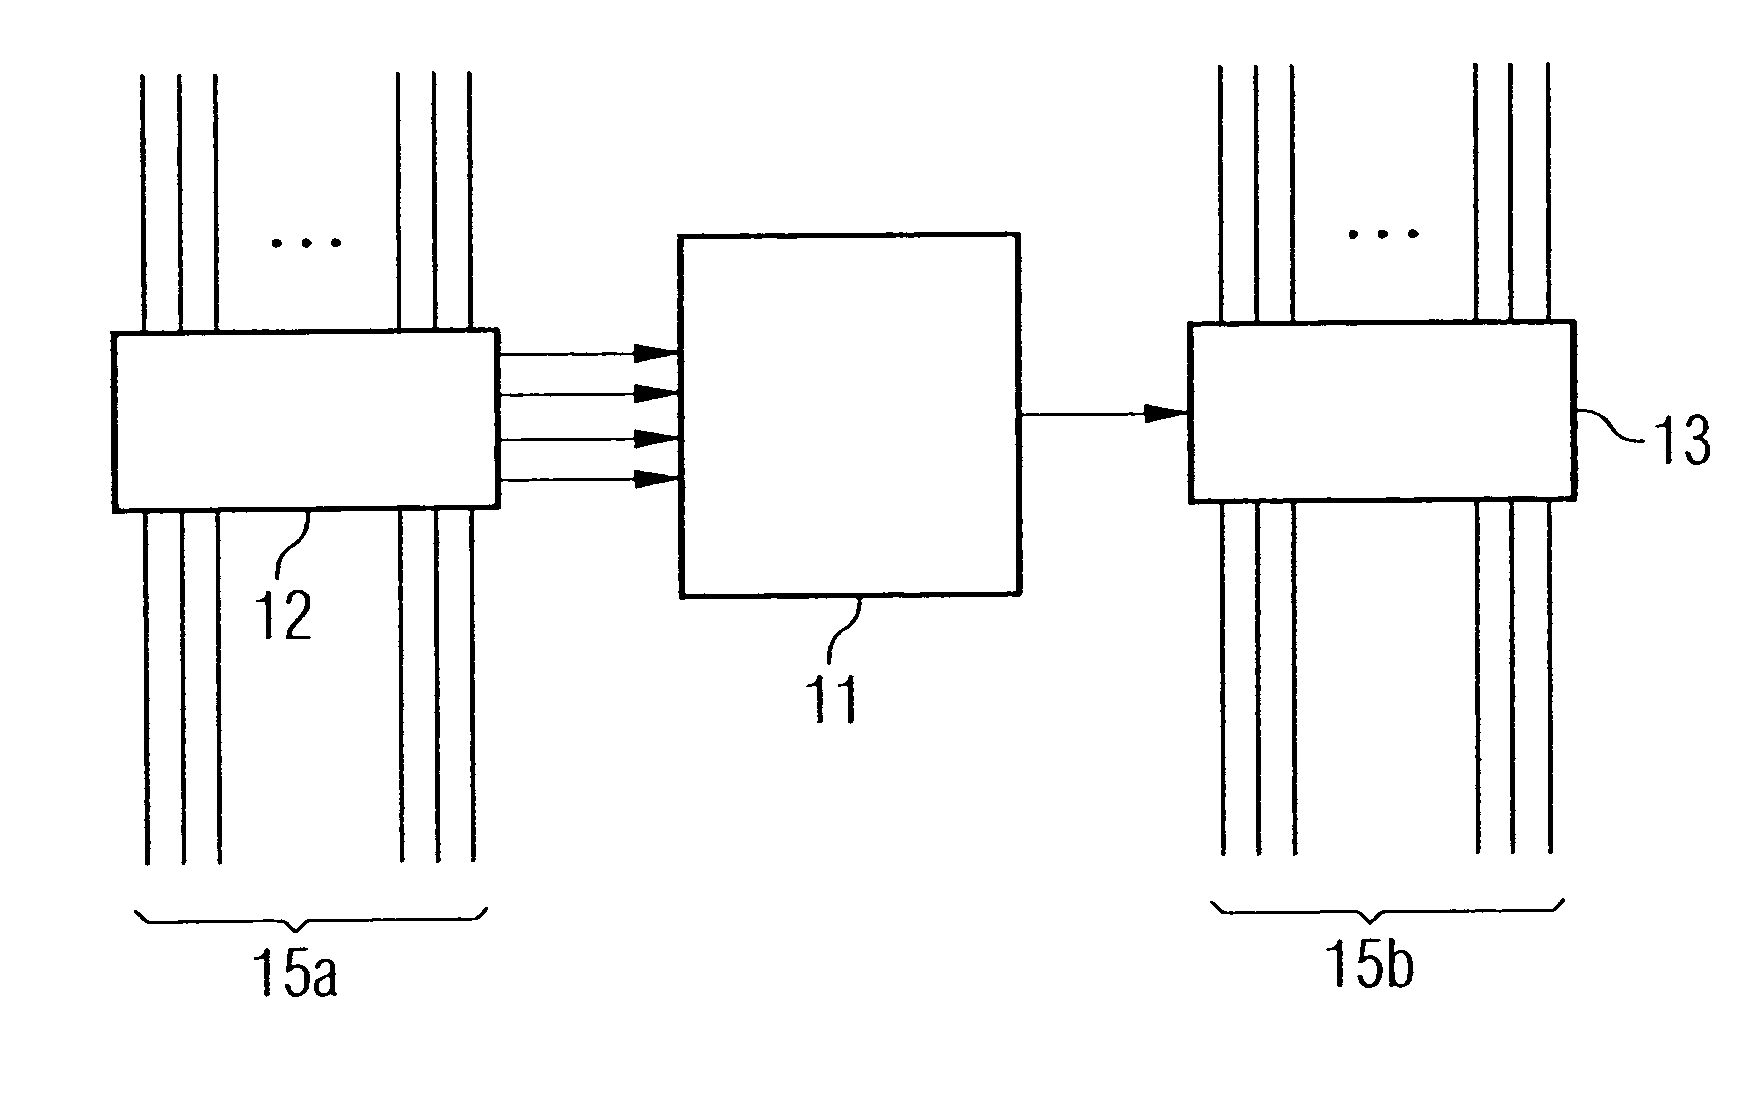 Configurable logic component without a local configuration memory and with a parallel configuration bus